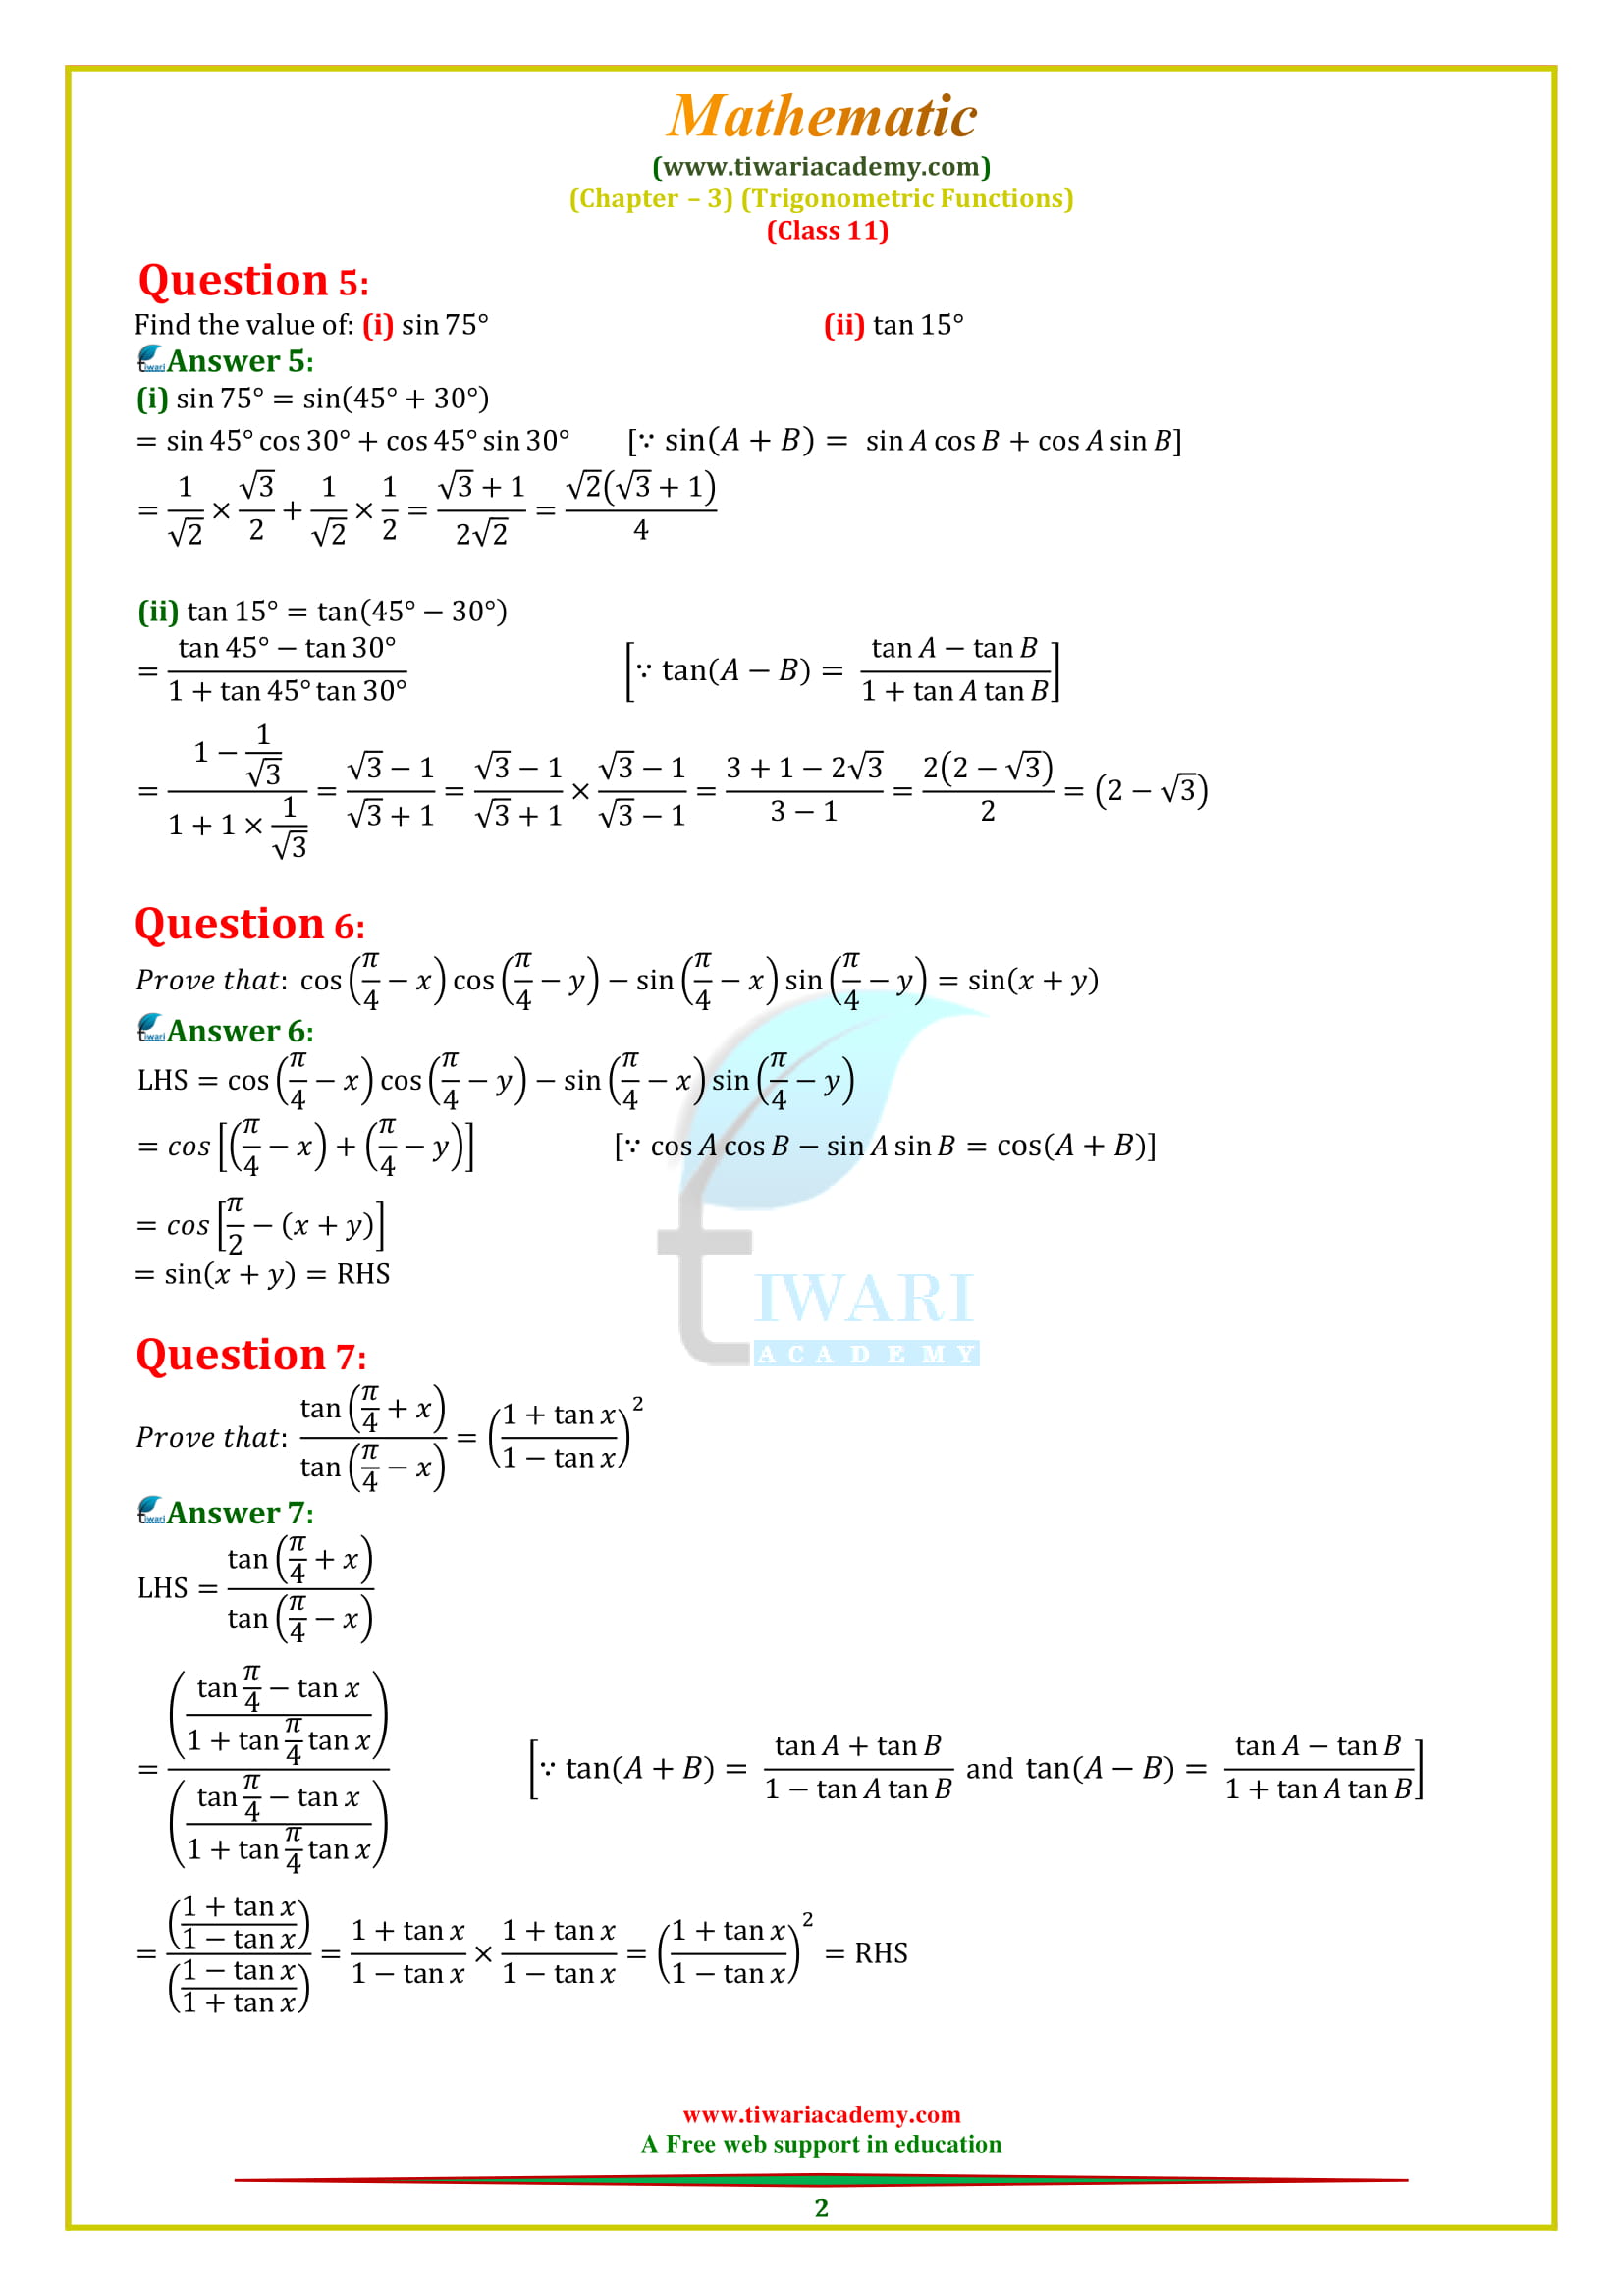 11 Maths Chapter 3 Exercise 3.3 solutions for 2018-19